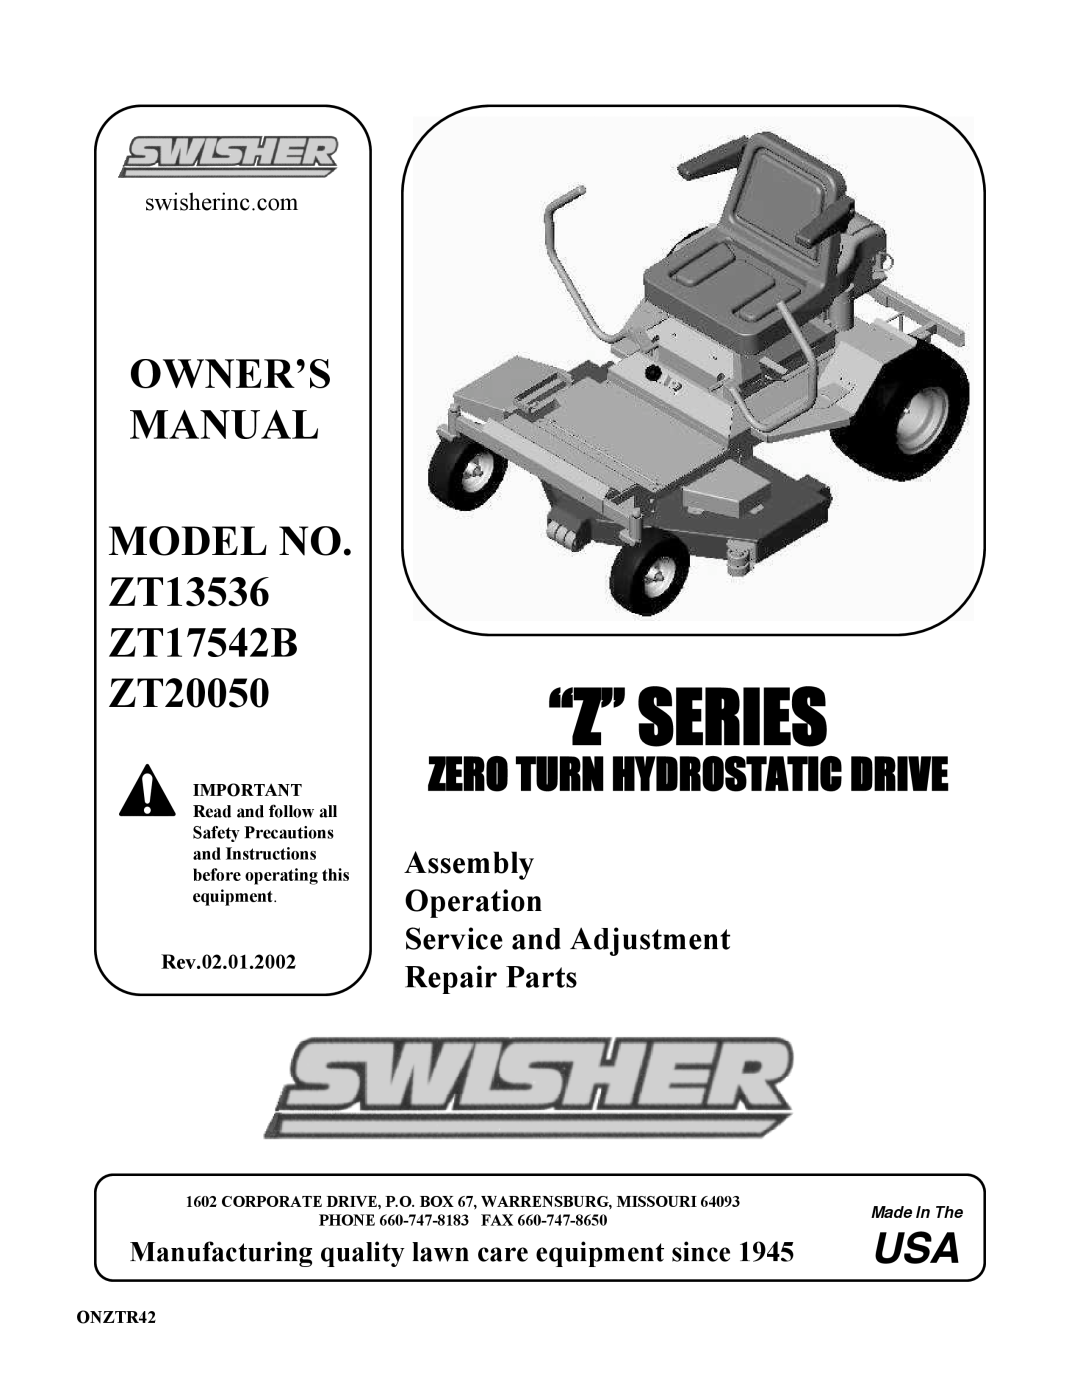 Swisher ZT20050, ZT13536, ZT17542B owner manual “Z” Series, Manufacturing quality lawn care equipment since, Repair Parts 